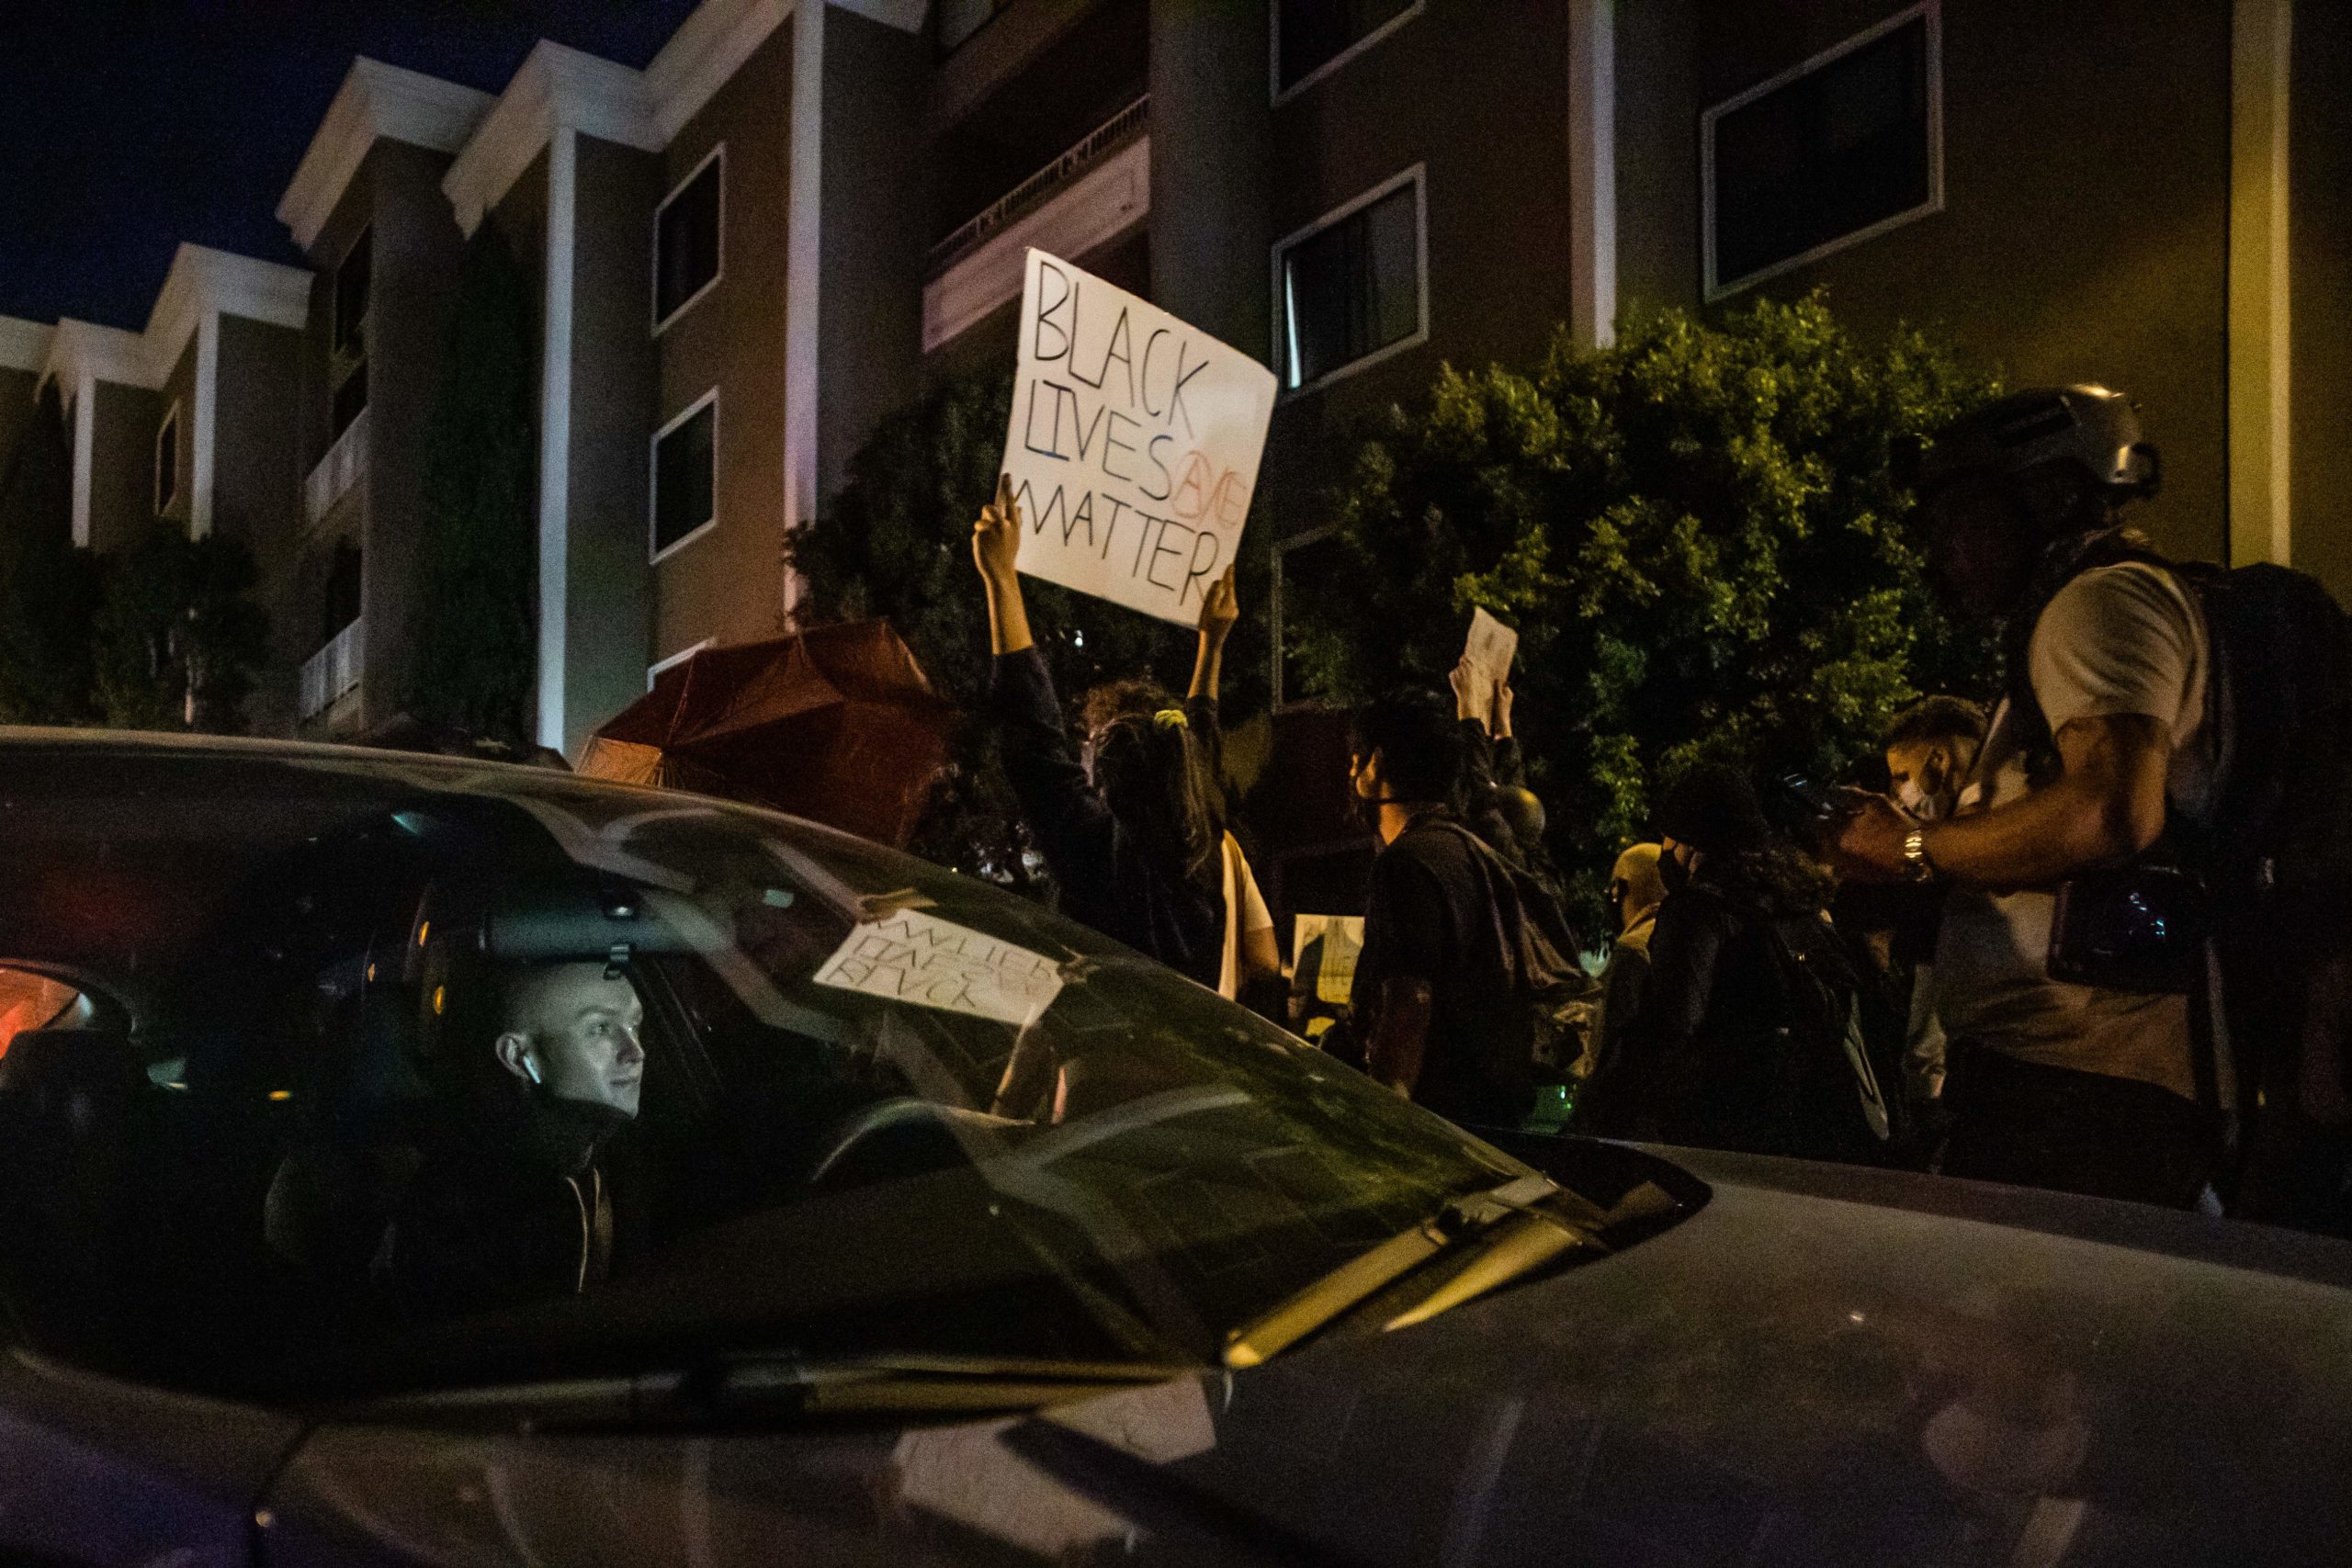 A driver stuck in the protest watches demonstrators passing by his car as they manifest their discontent over the lack of criminal charges in the police killing of Breonna Taylor in West Hollywood, California on September 25, 2020. - The family of Breonna Taylor today, September 25, demanded that US authorities release grand jury transcripts showing why no police will face direct criminal charges over her death, which has once again galvanized protesters angry about racism and police brutality in America. (Photo by Apu GOMES / AFP) (Photo by APU GOMES/AFP via Getty Images)